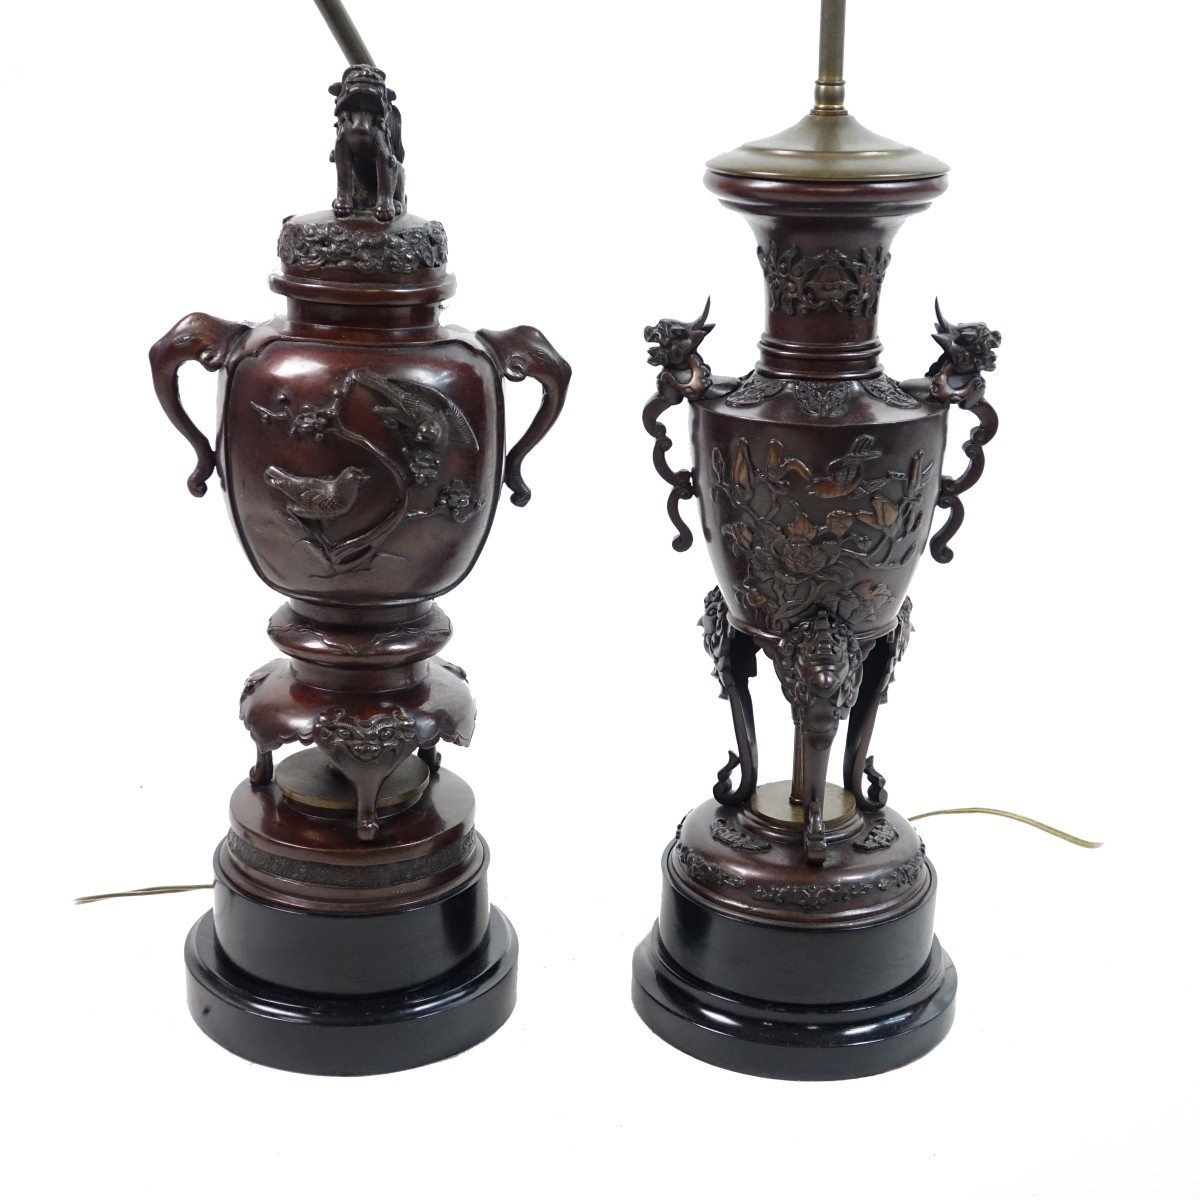 Two (2) Japanese Urns Mounted as Lamps